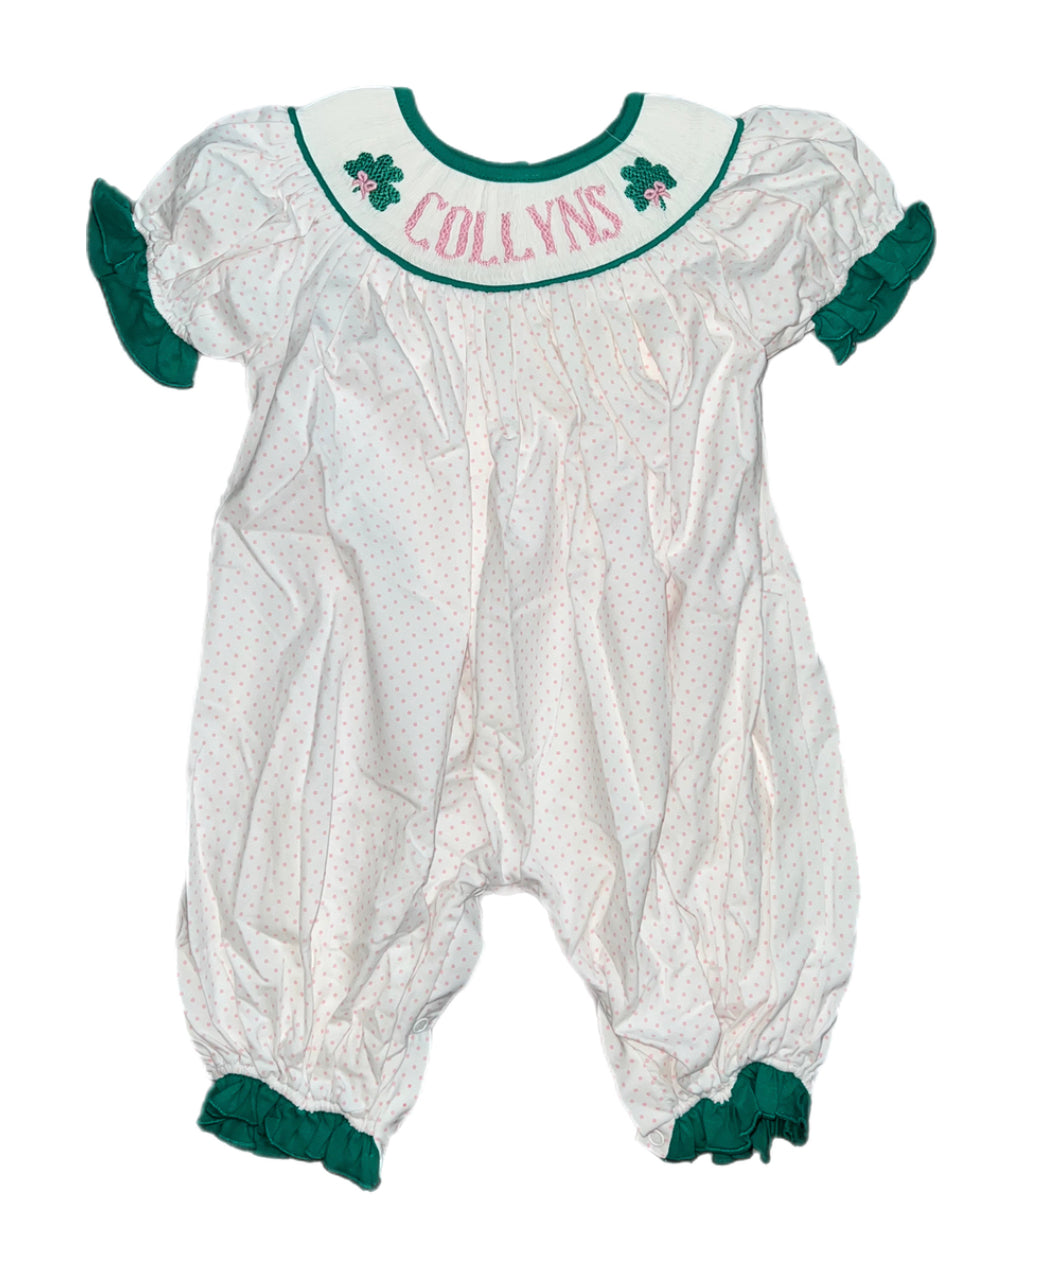 RTS: Name Smock Collection- Girls Shamrock Bitty Dot Knit Romper “Collyns”